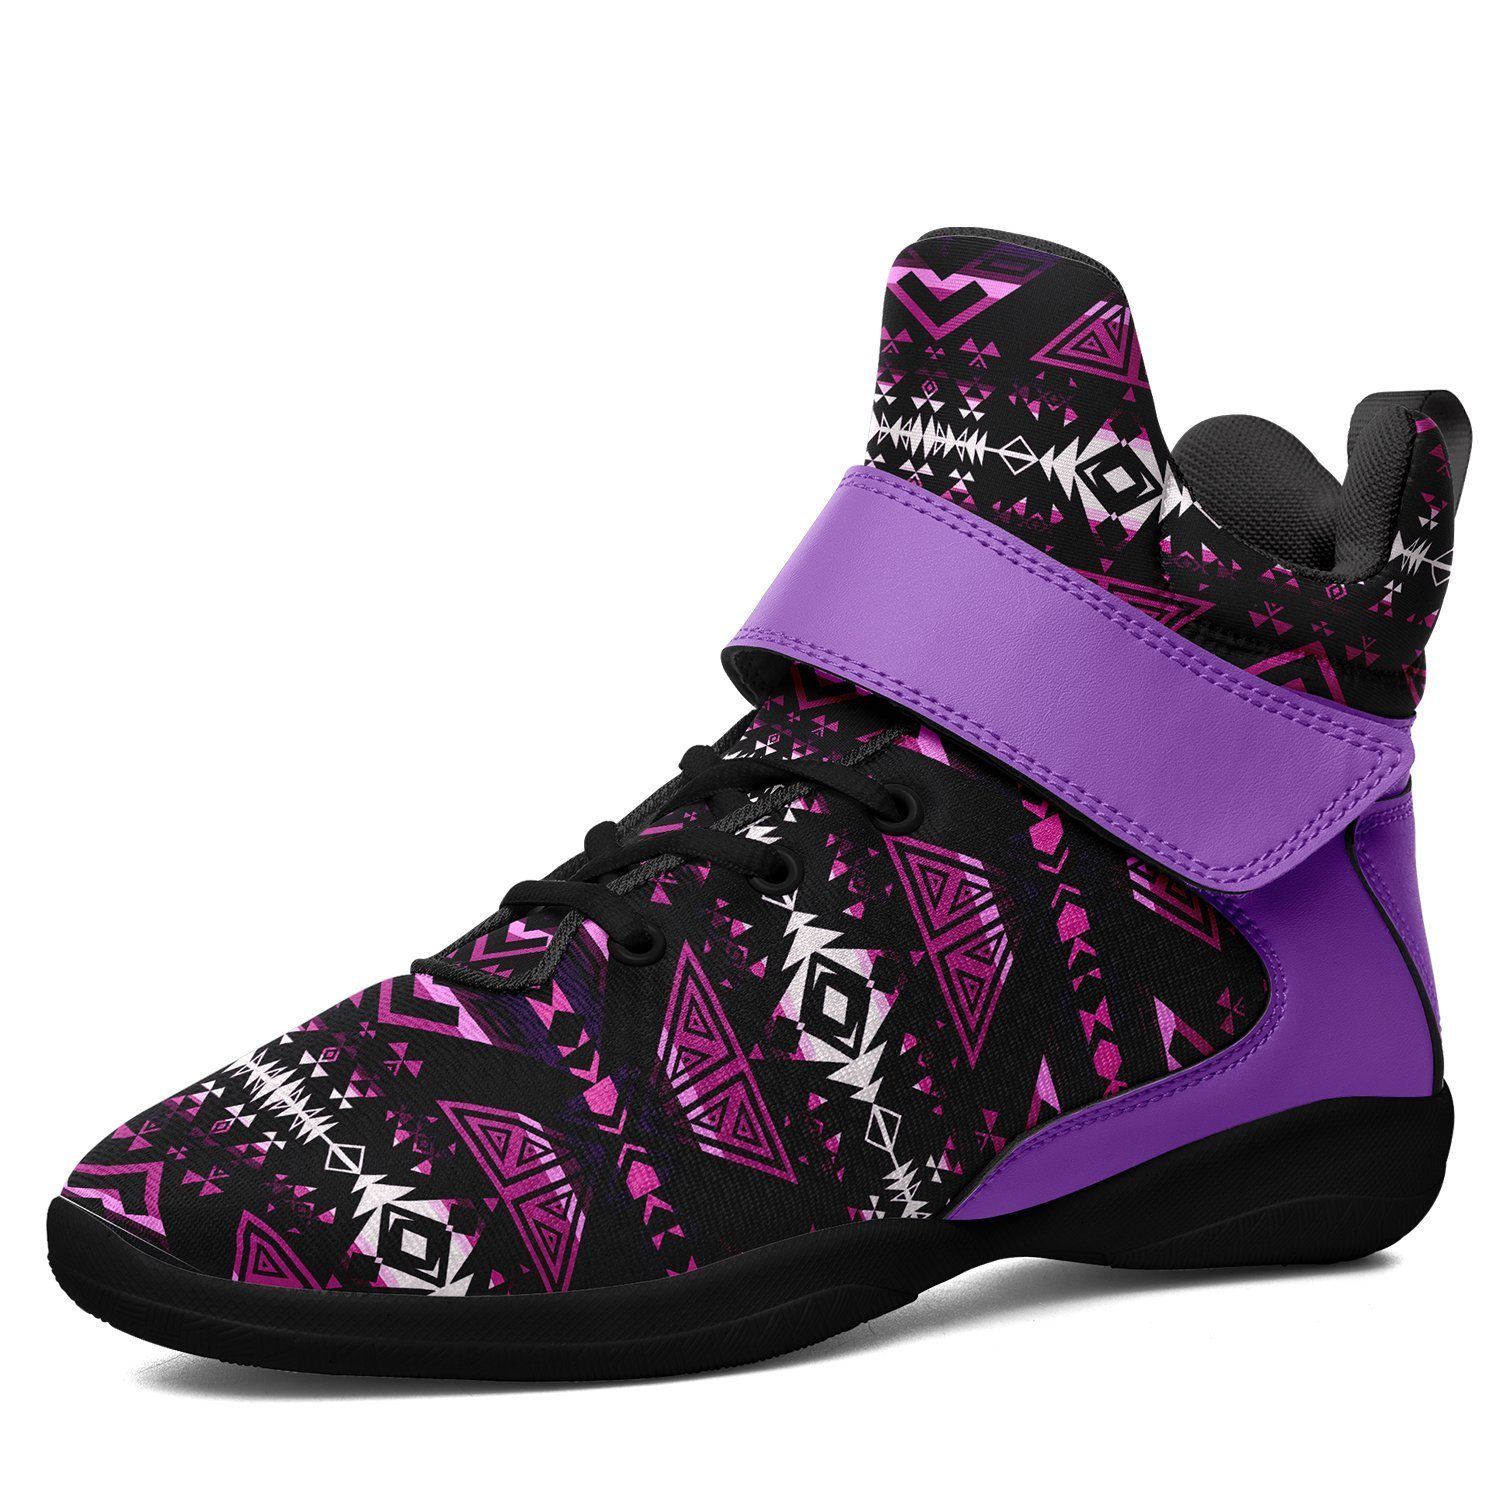 Upstream Expedition Moonlight Shadows Kid's Ipottaa Basketball / Sport High Top Shoes 49 Dzine US Child 12.5 / EUR 30 Black Sole with Lavender Strap 